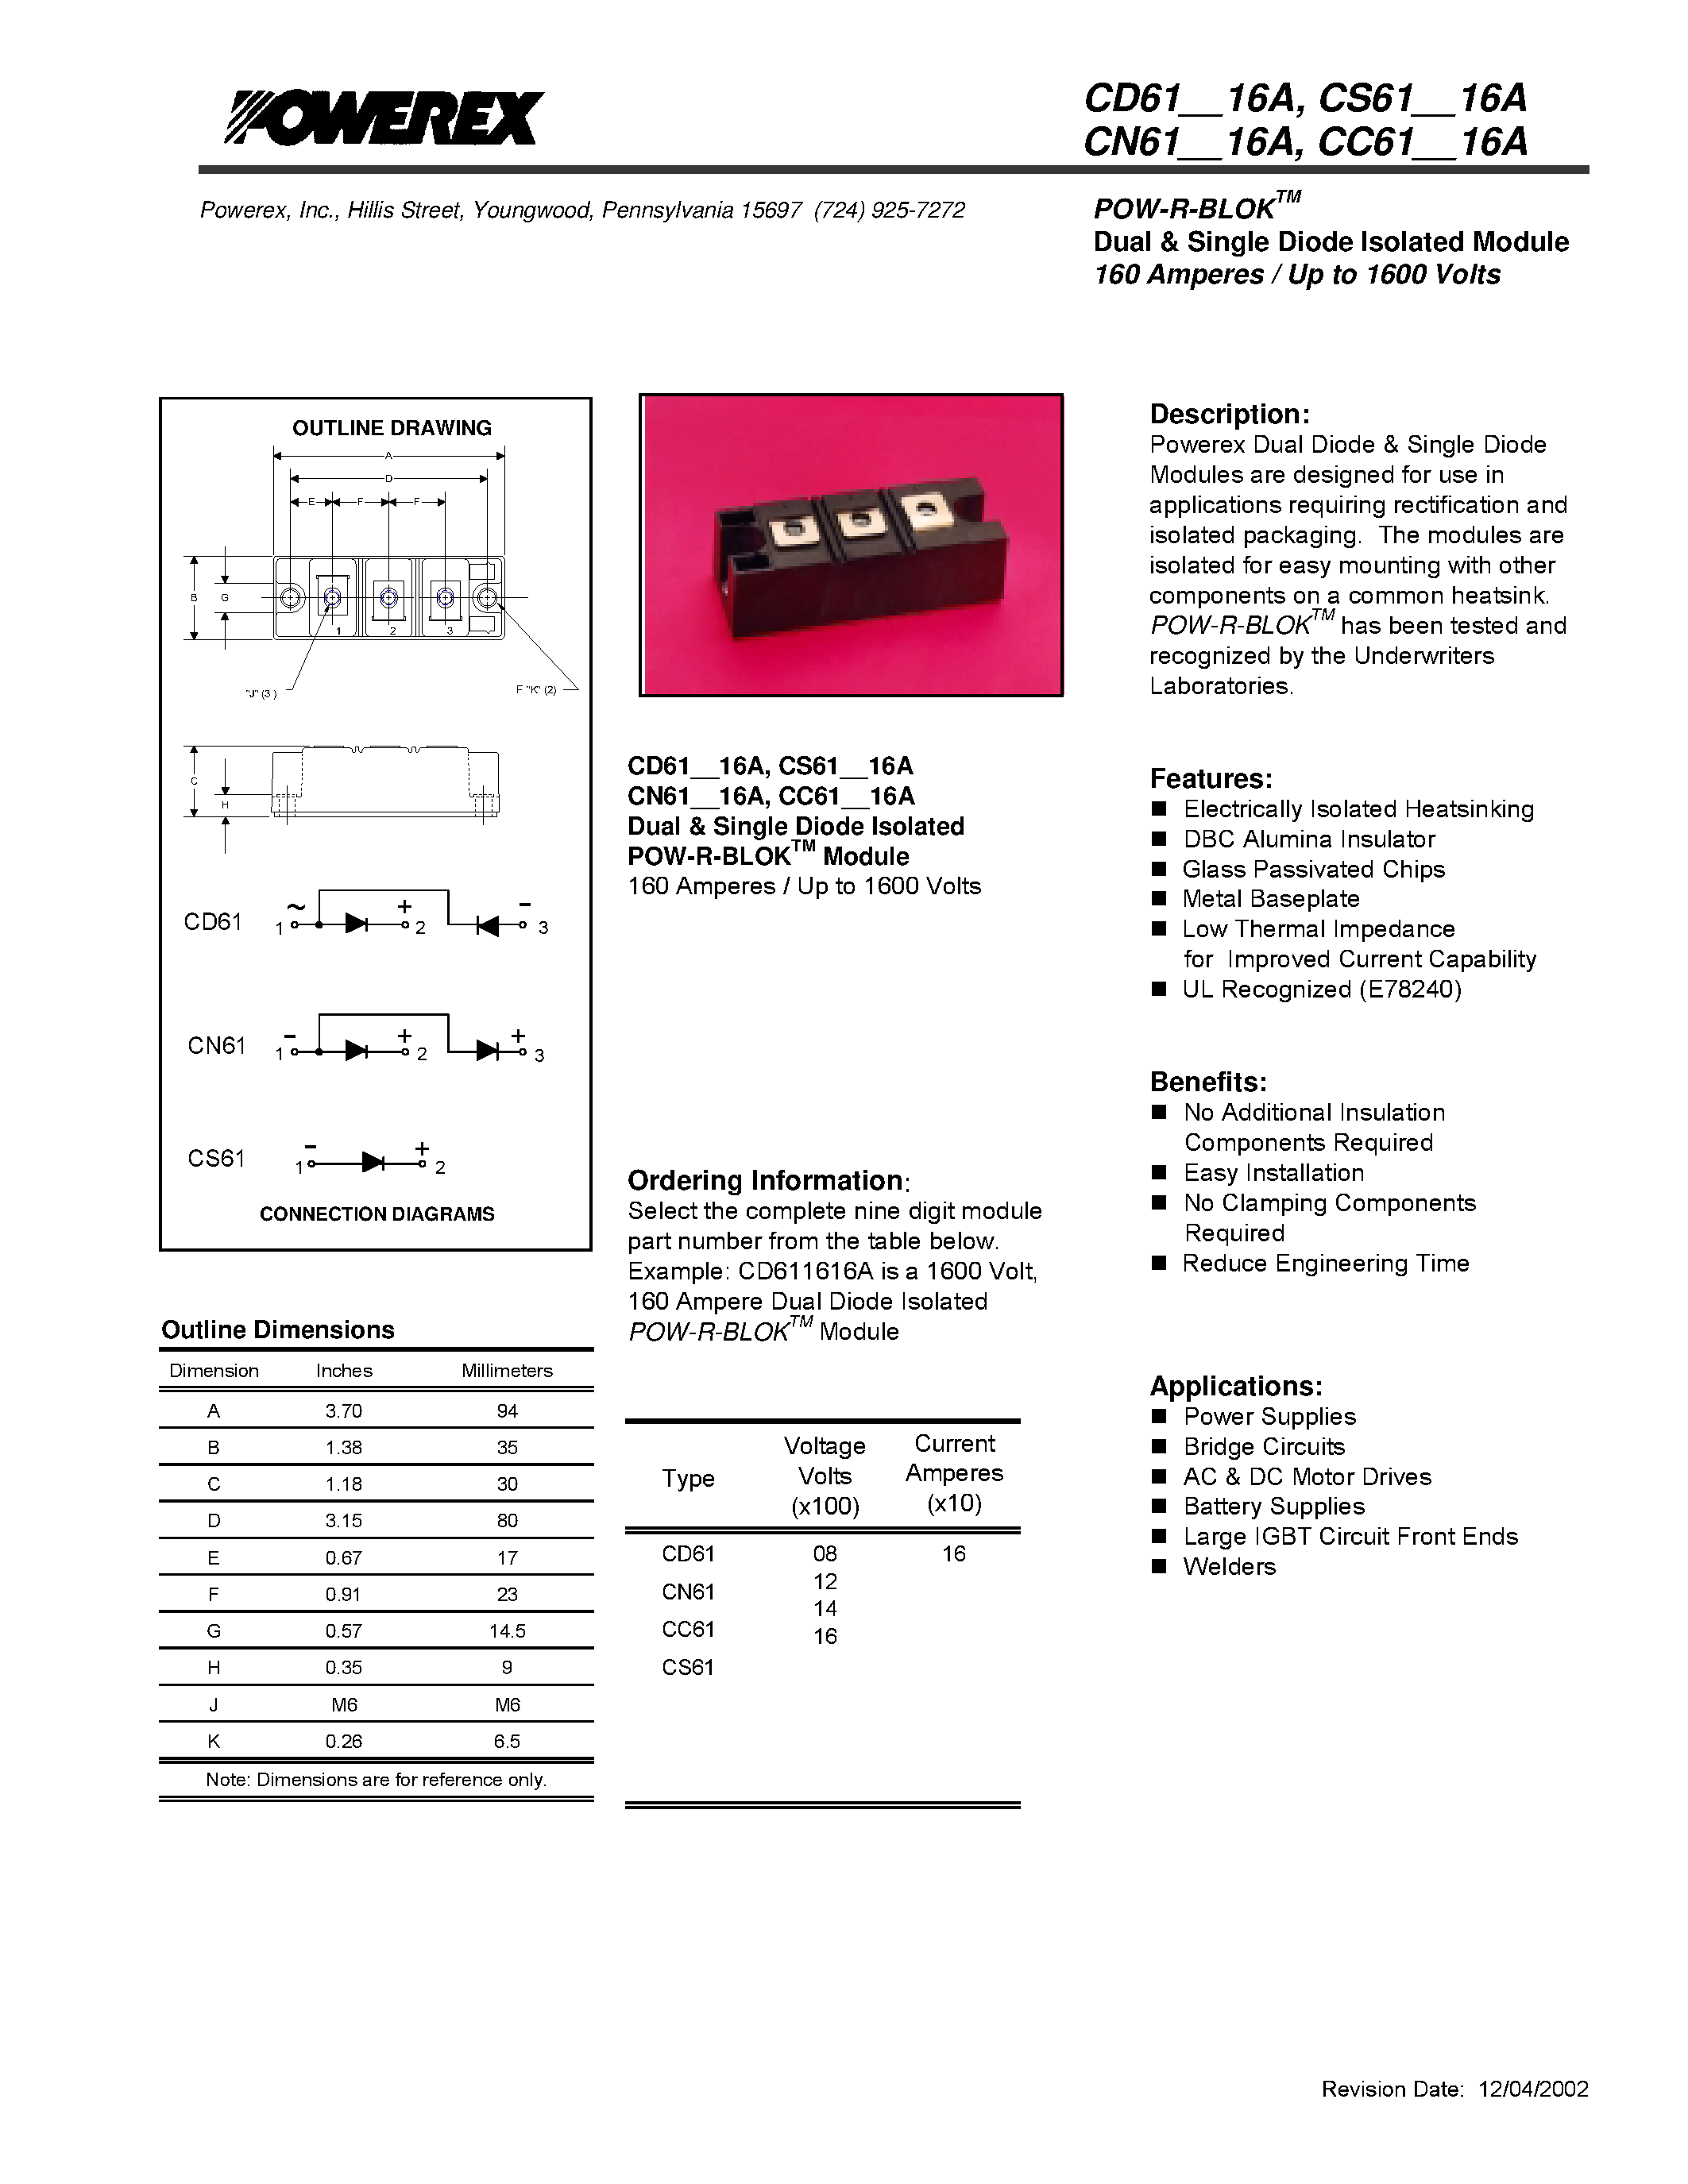 Datasheet CD611416 - POW-R-BLOK Dual & Single Diode Isolated Module 160 Amperes / Up to 1600 Volts page 1